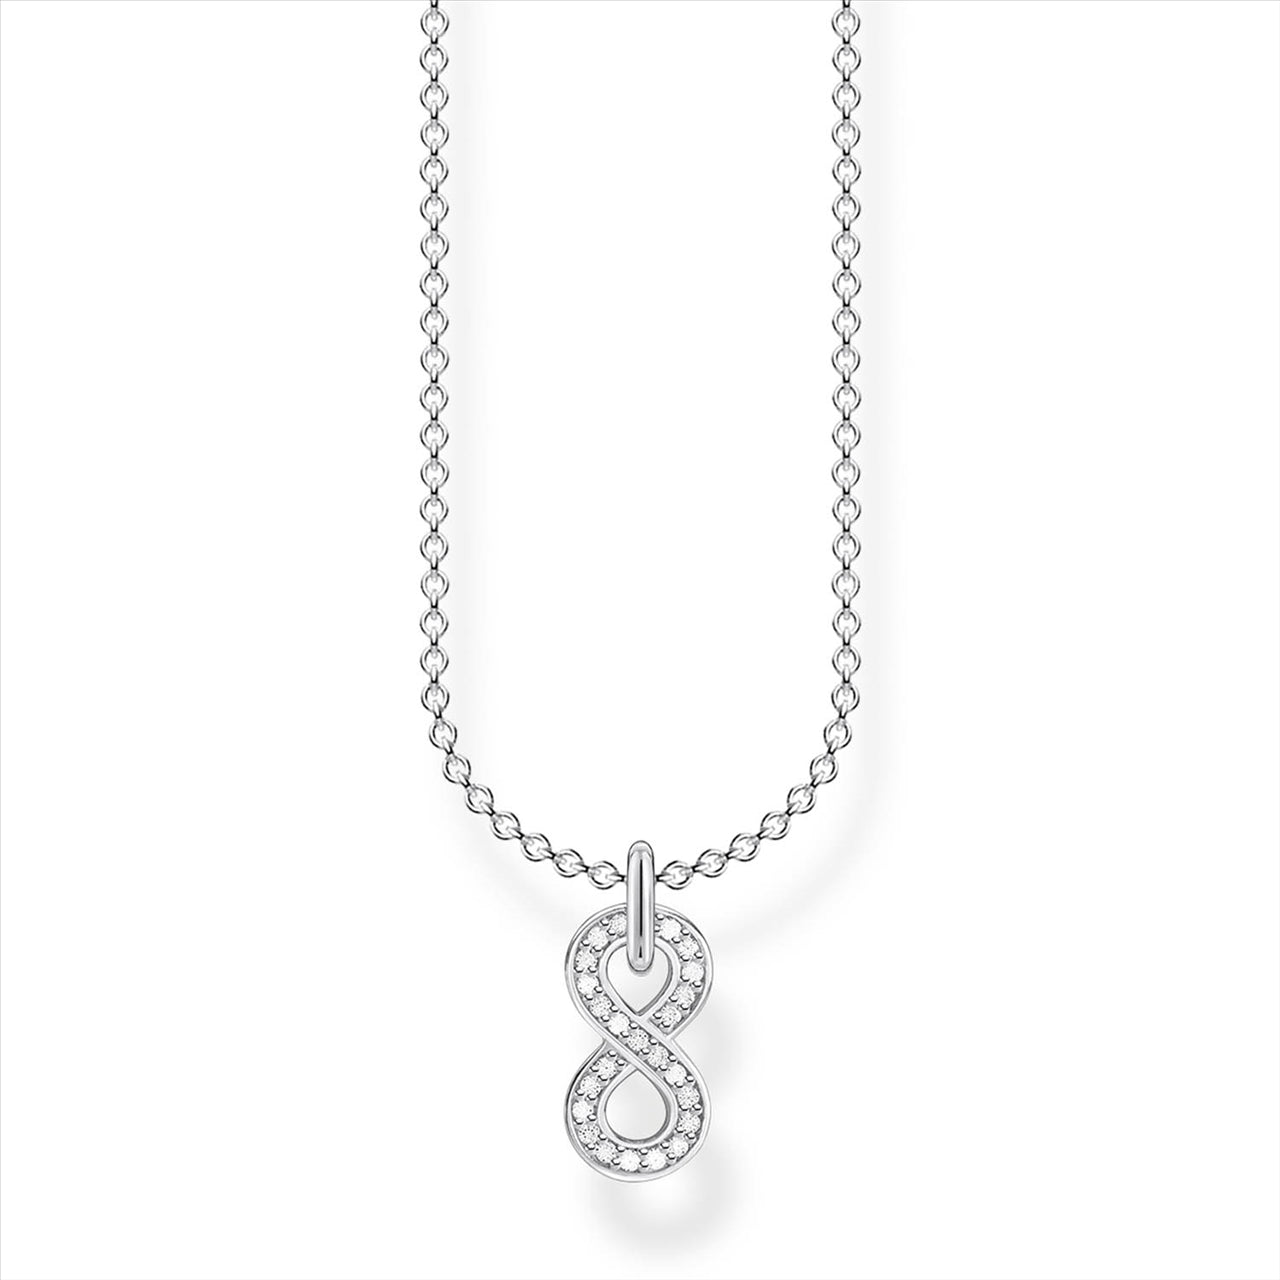 Thomas Sabo Charming Silver Infinity Necklace 38-45cm